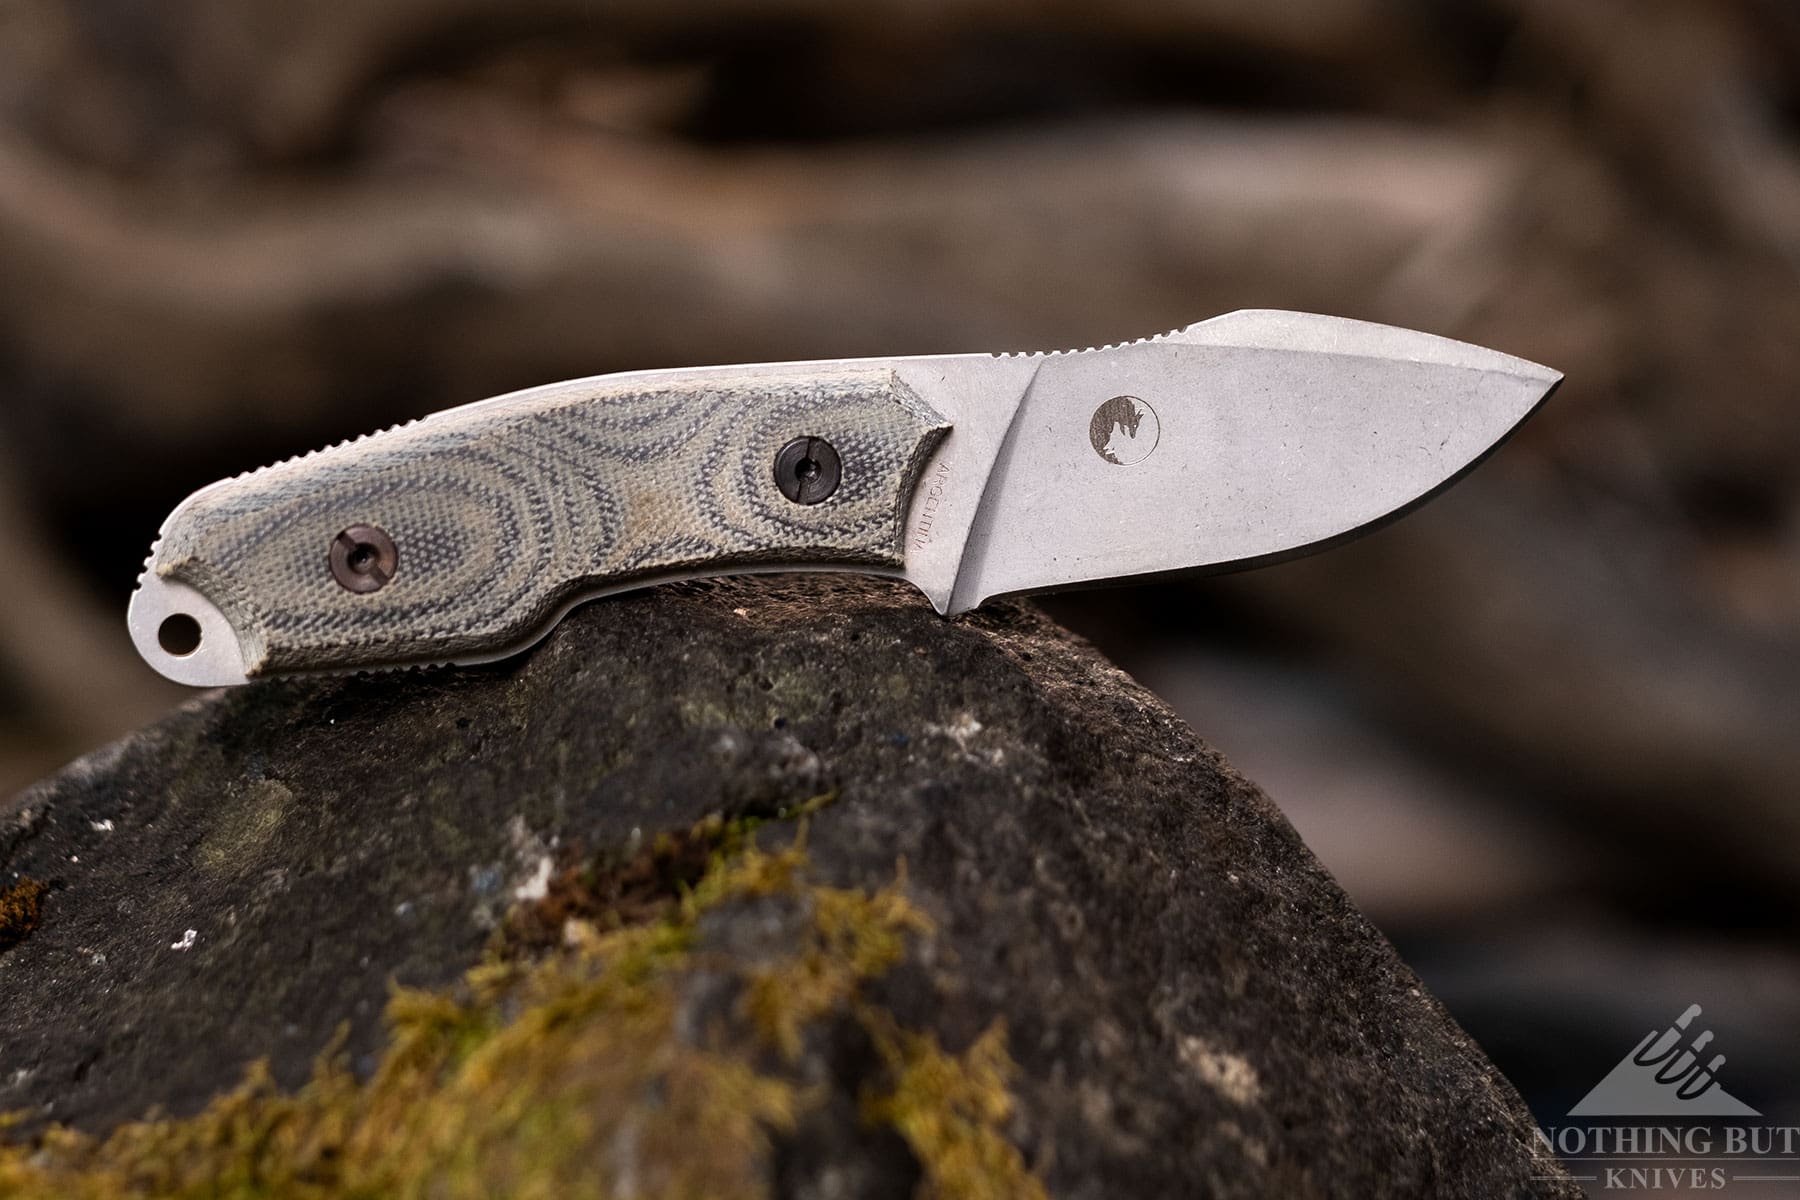 The Boker Arbolito fixed blade knife sitting on a rock in the forest.